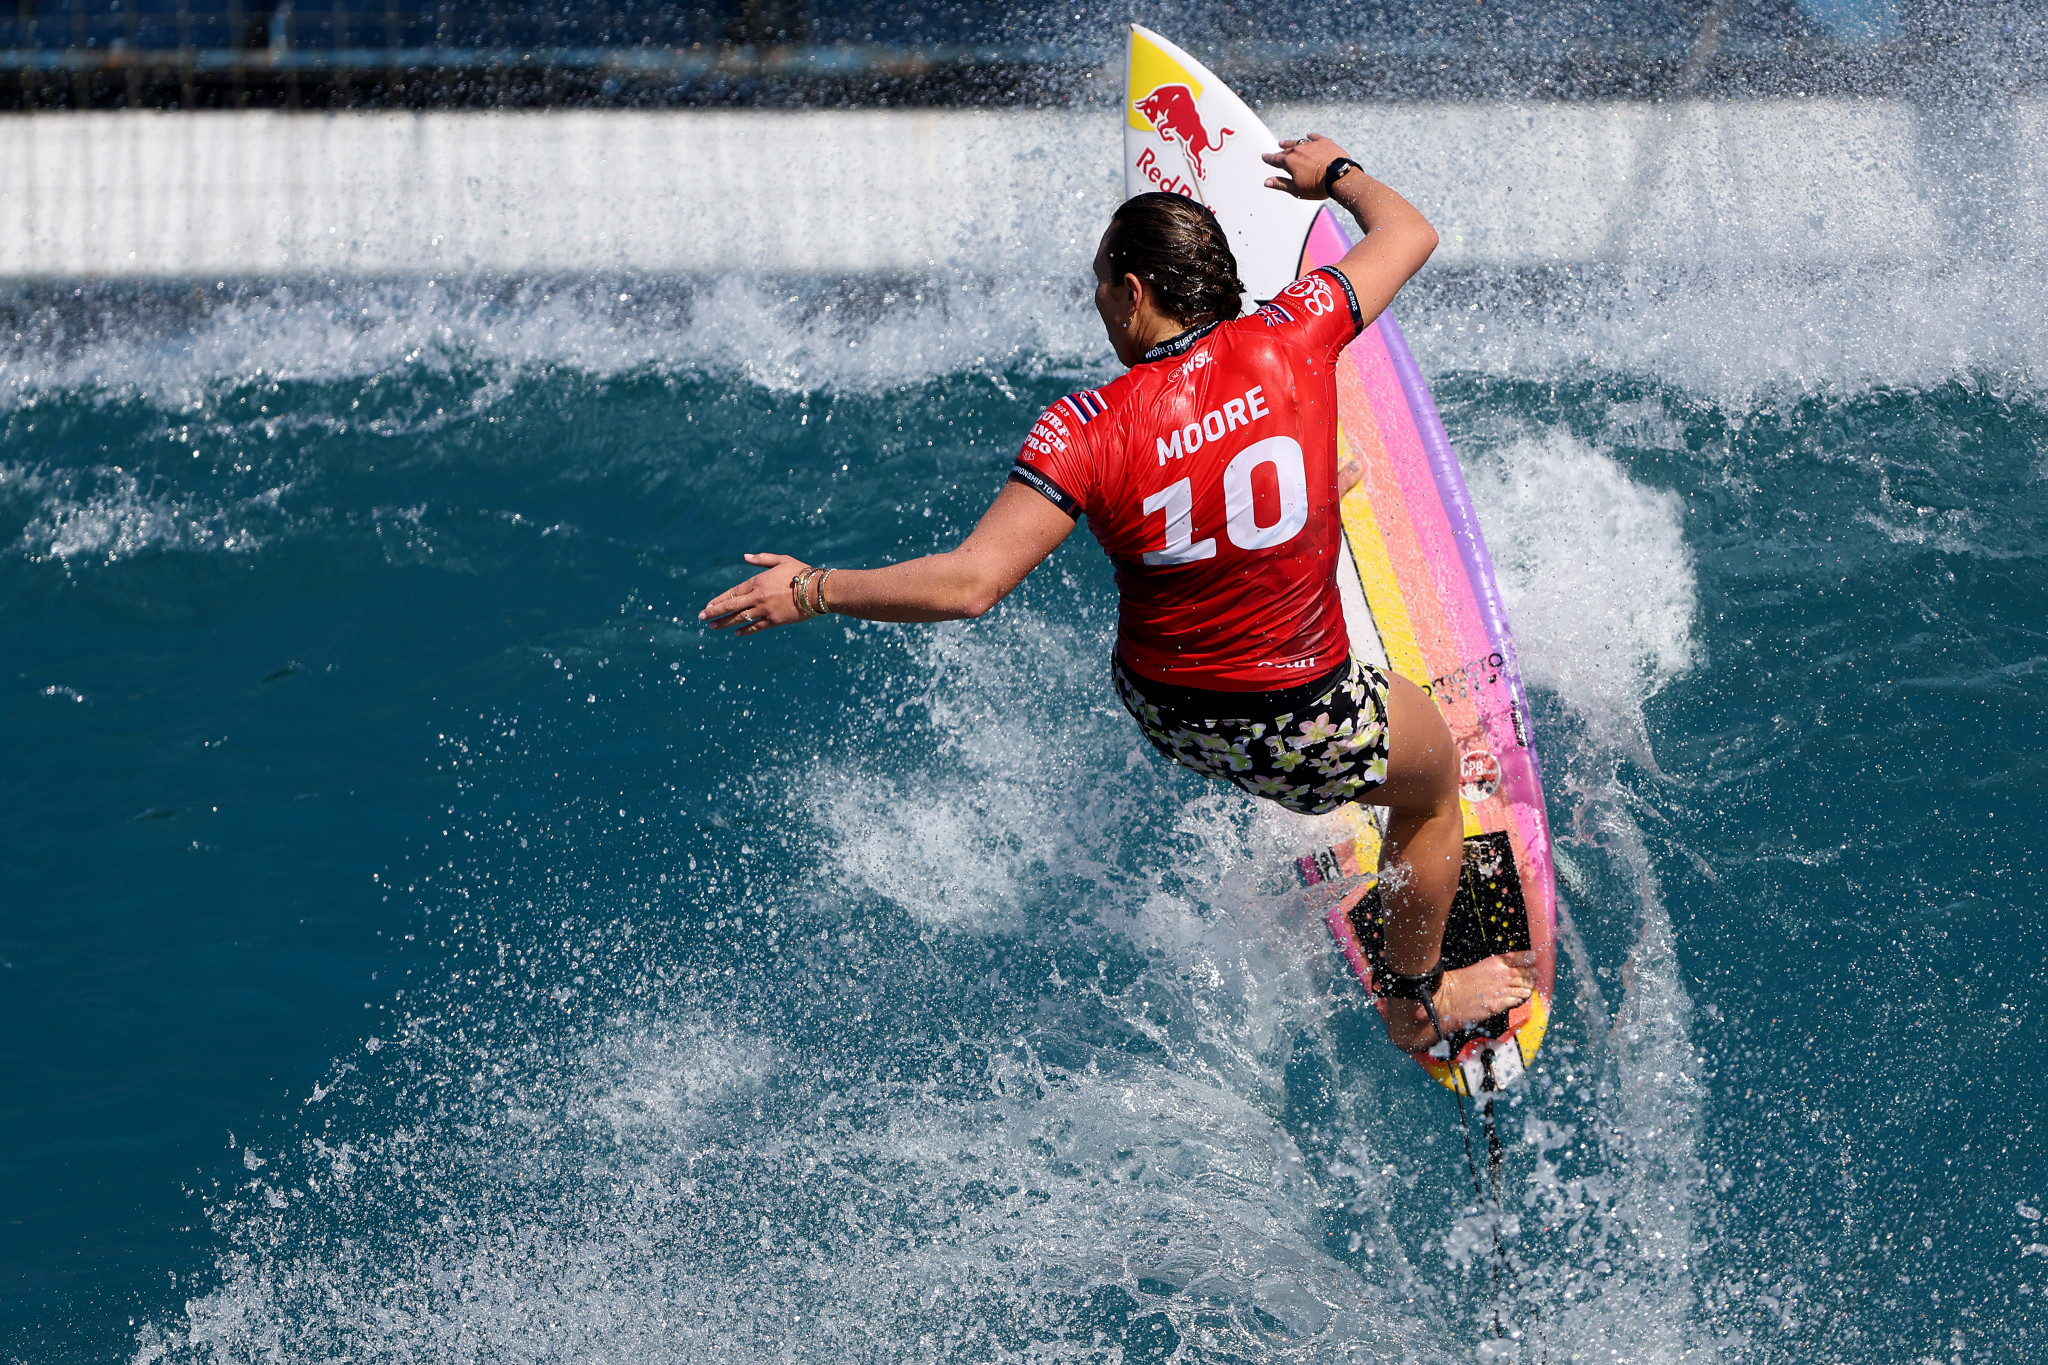 Olympic champion Carissa Moore has started well at the World Surfing Games ©Getty Images